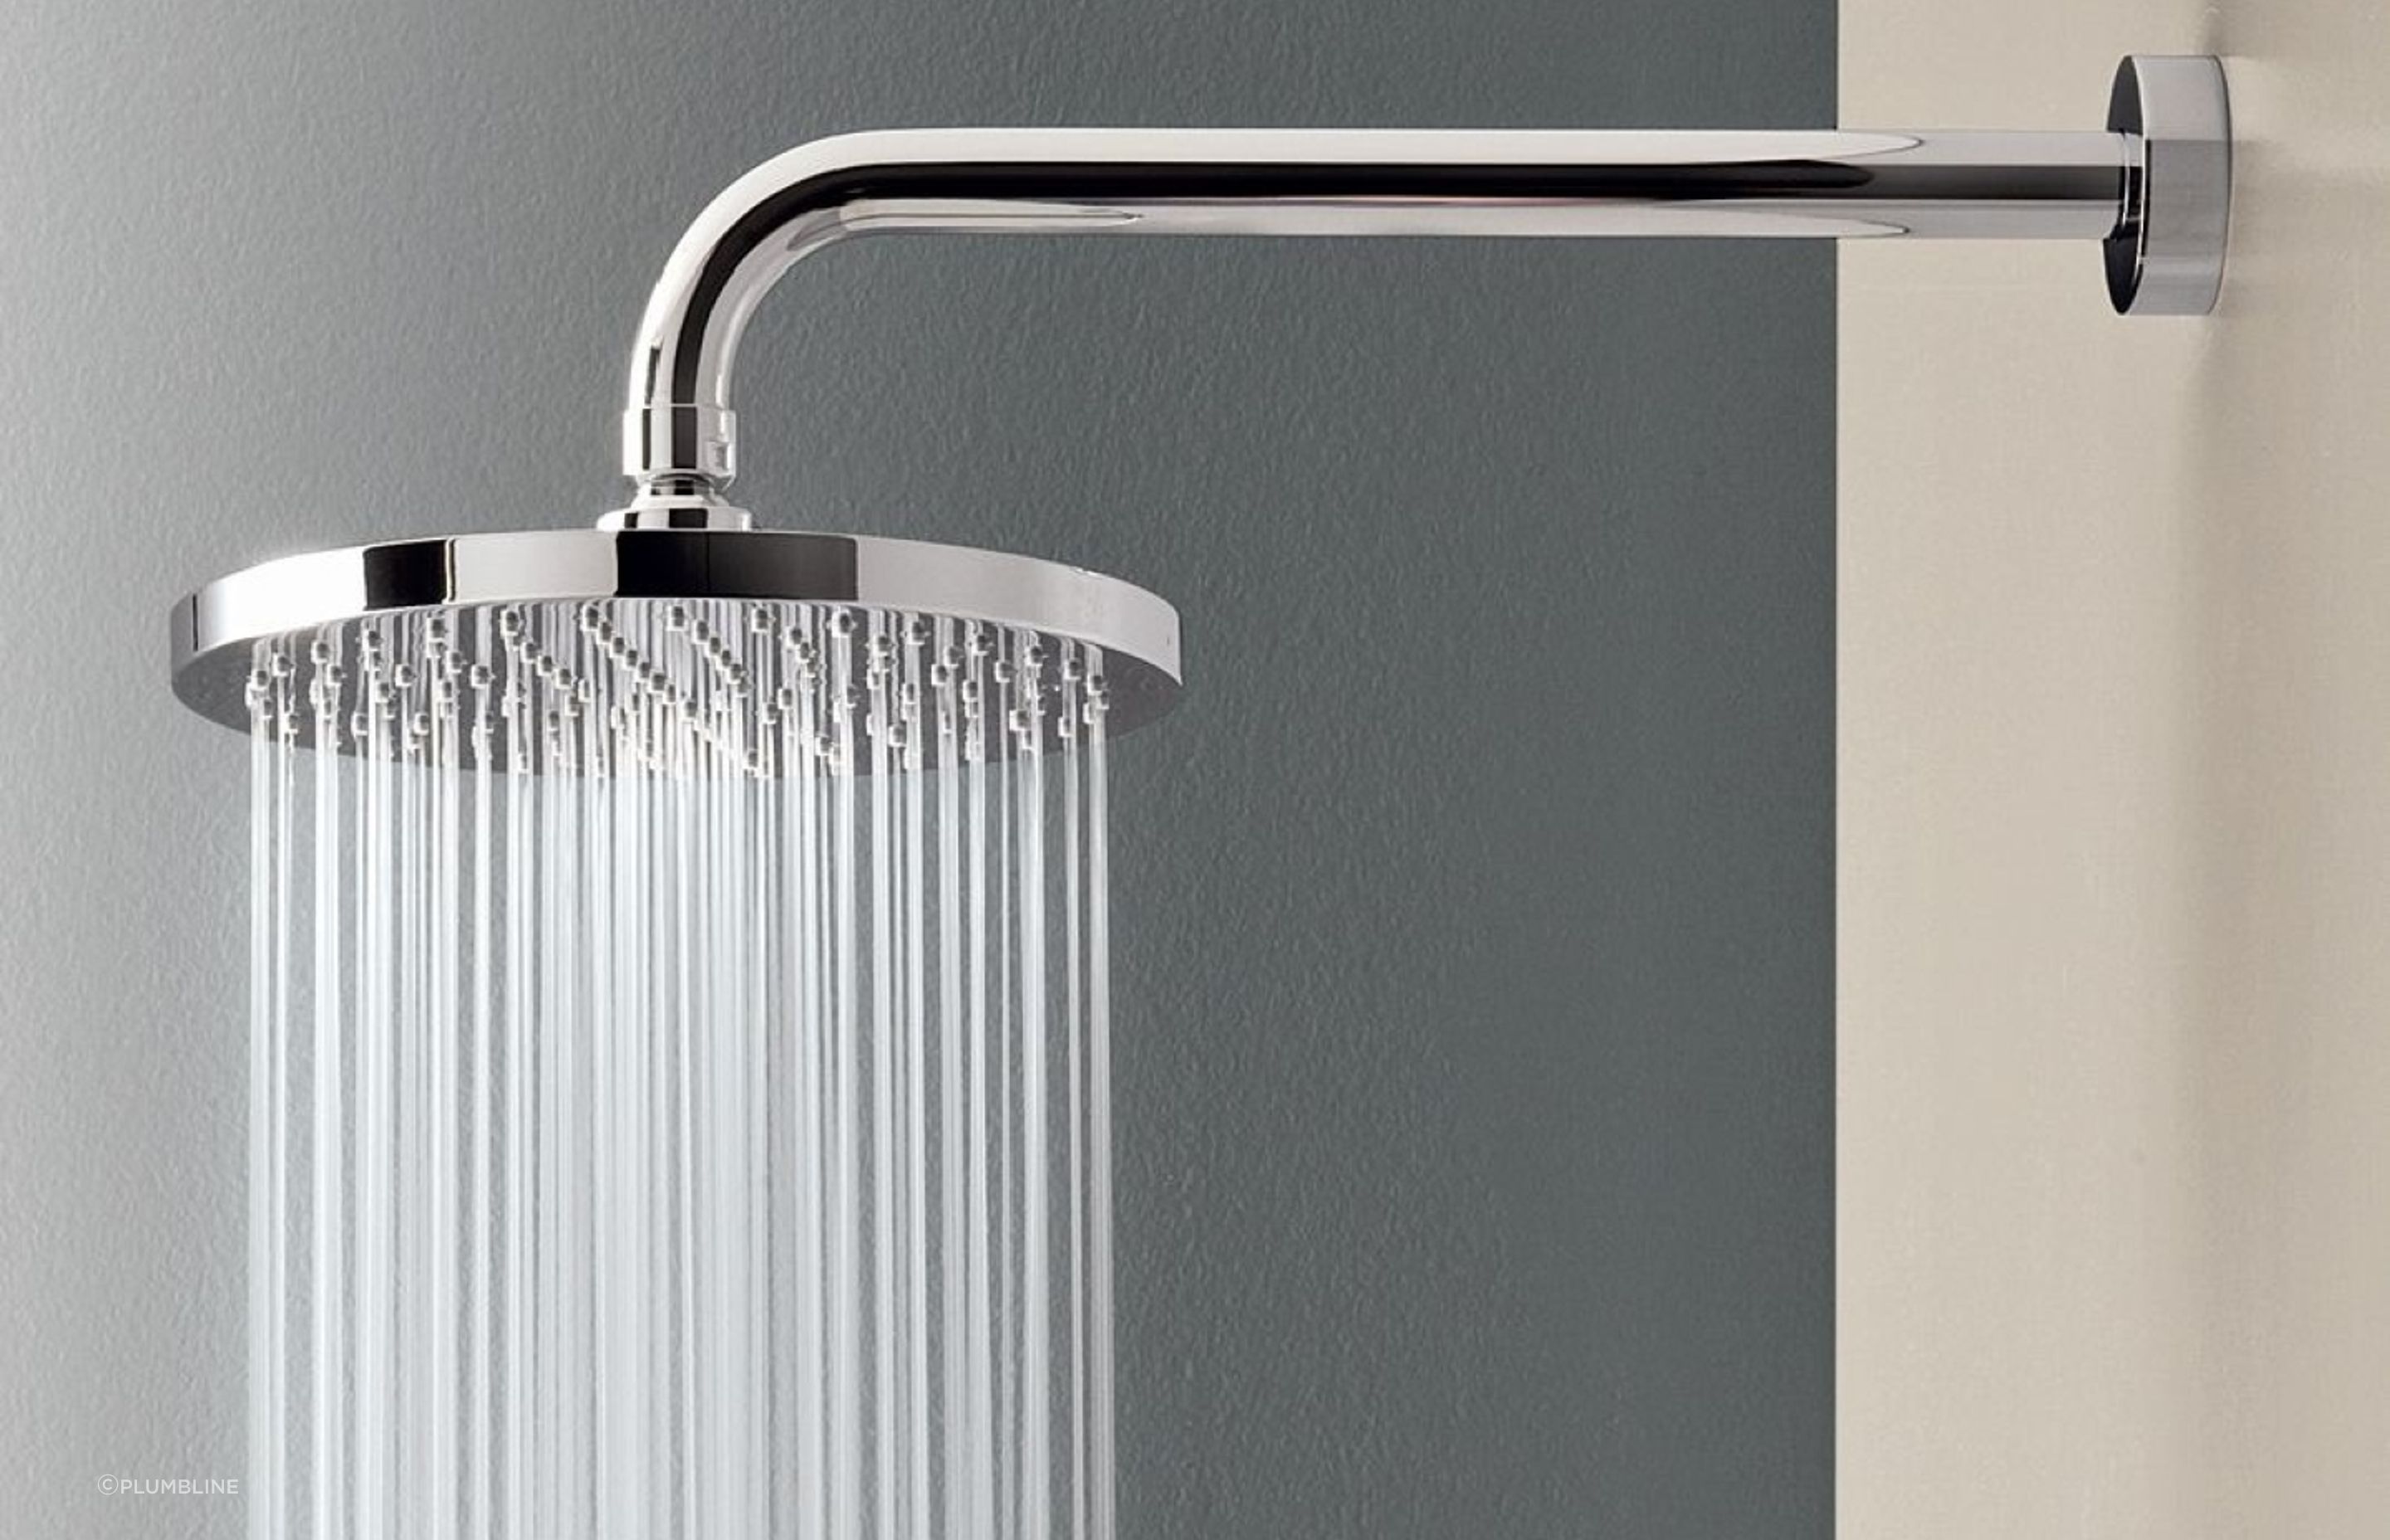 Rainfall shower heads, like the Young 200mm Wall Mount Rainhead, are incredibly popular in New Zealand.